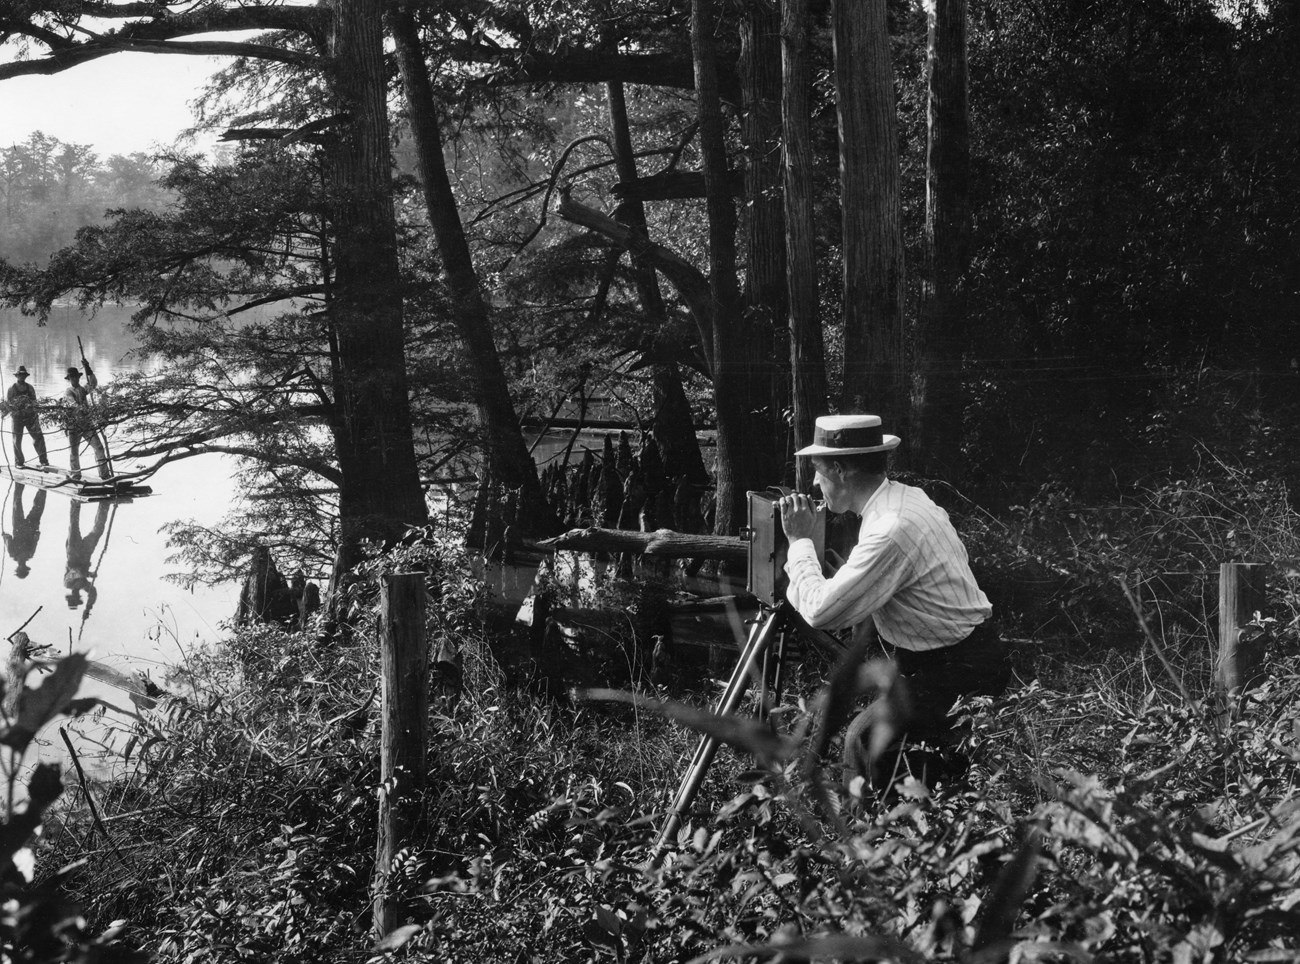 E.B. Thompson films two men on a skiff in the Everglades